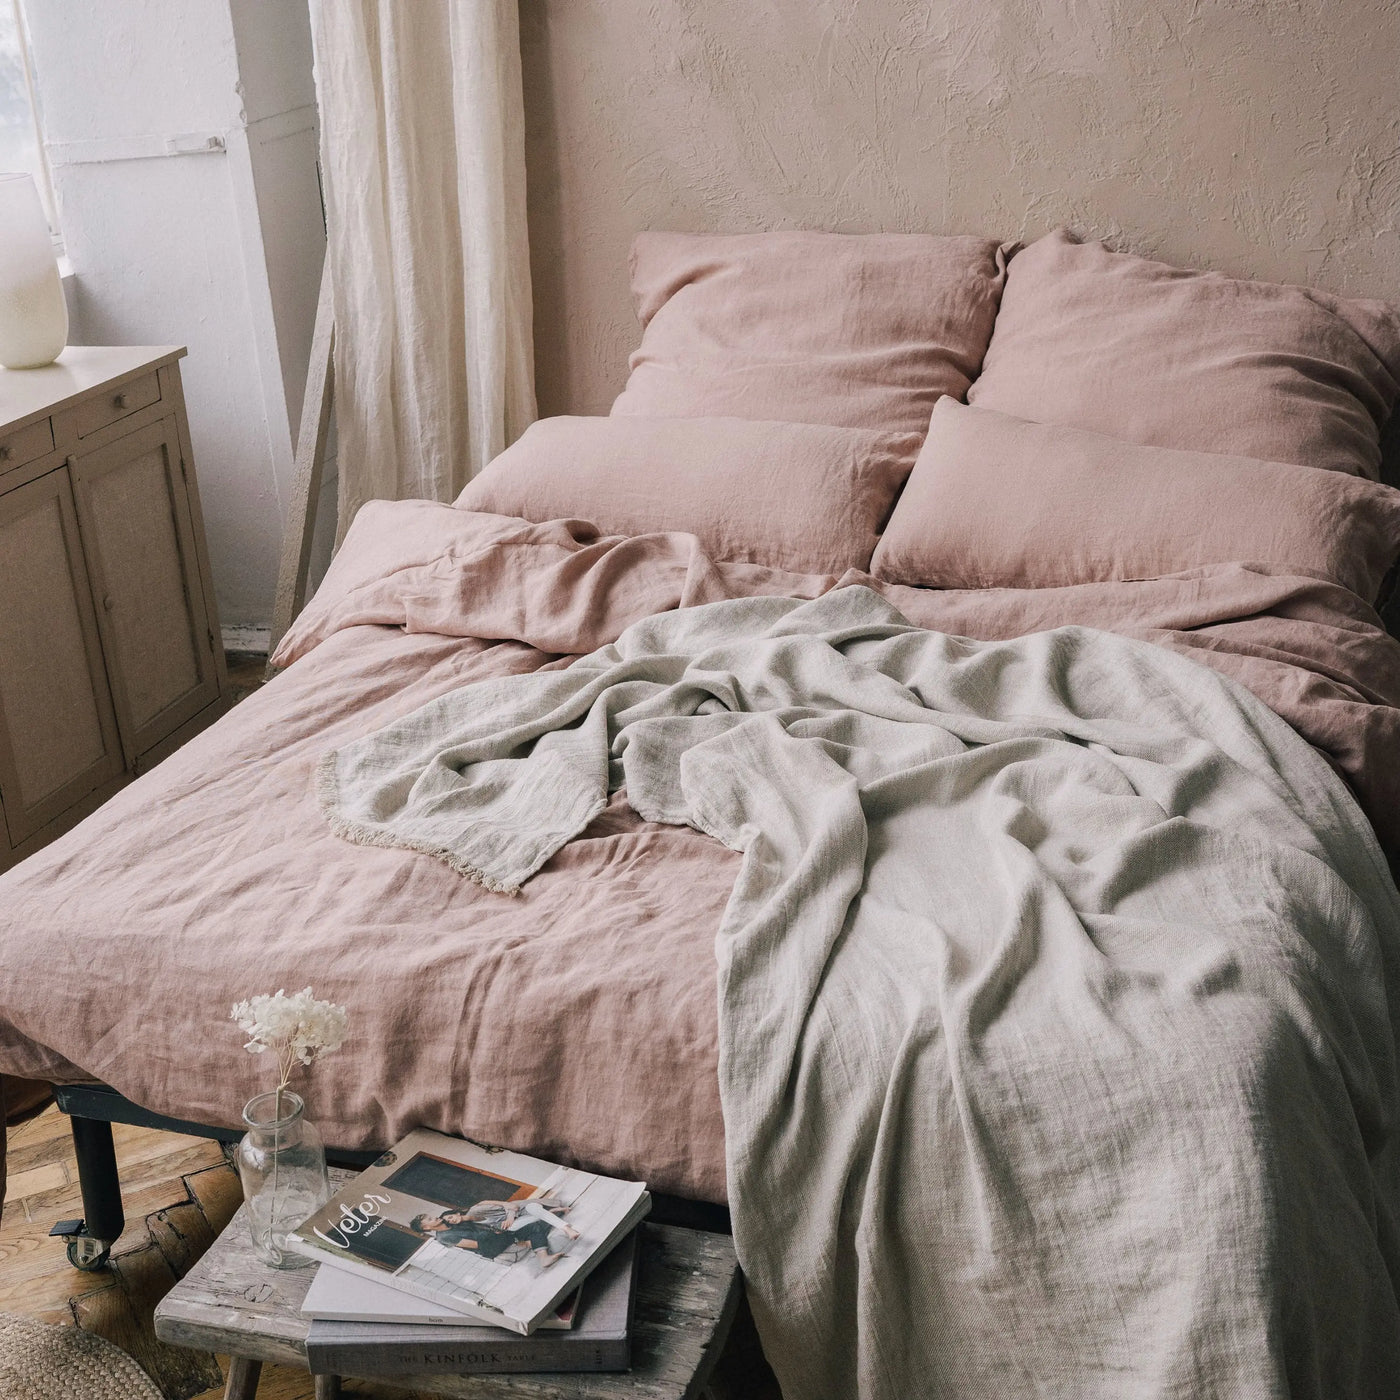 Buy Now Organic Linen Bedding Set 135x200 in Coral Tide 5